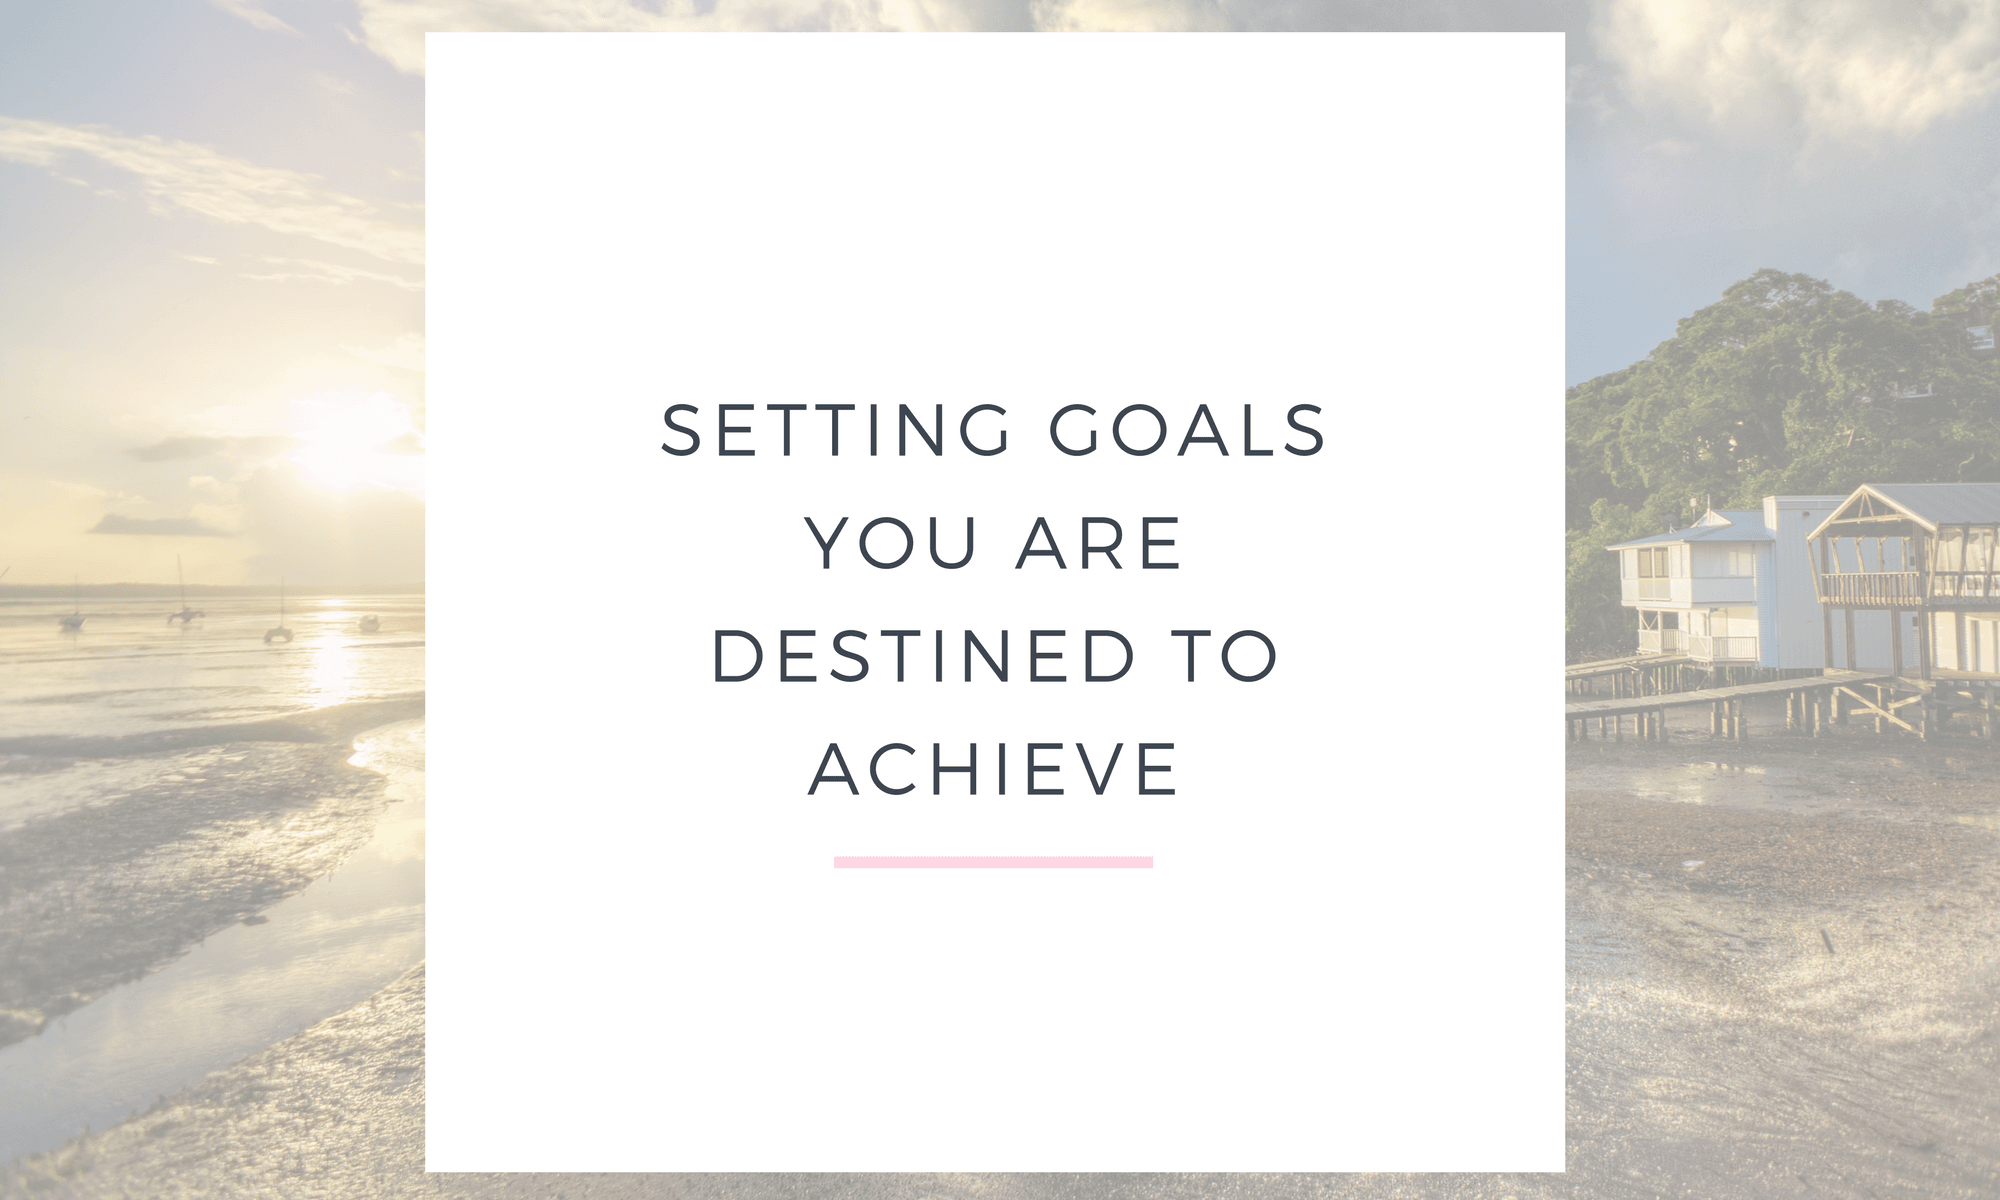 SETTING GOALS YOU ARE DESTINED TO ACHIEVE